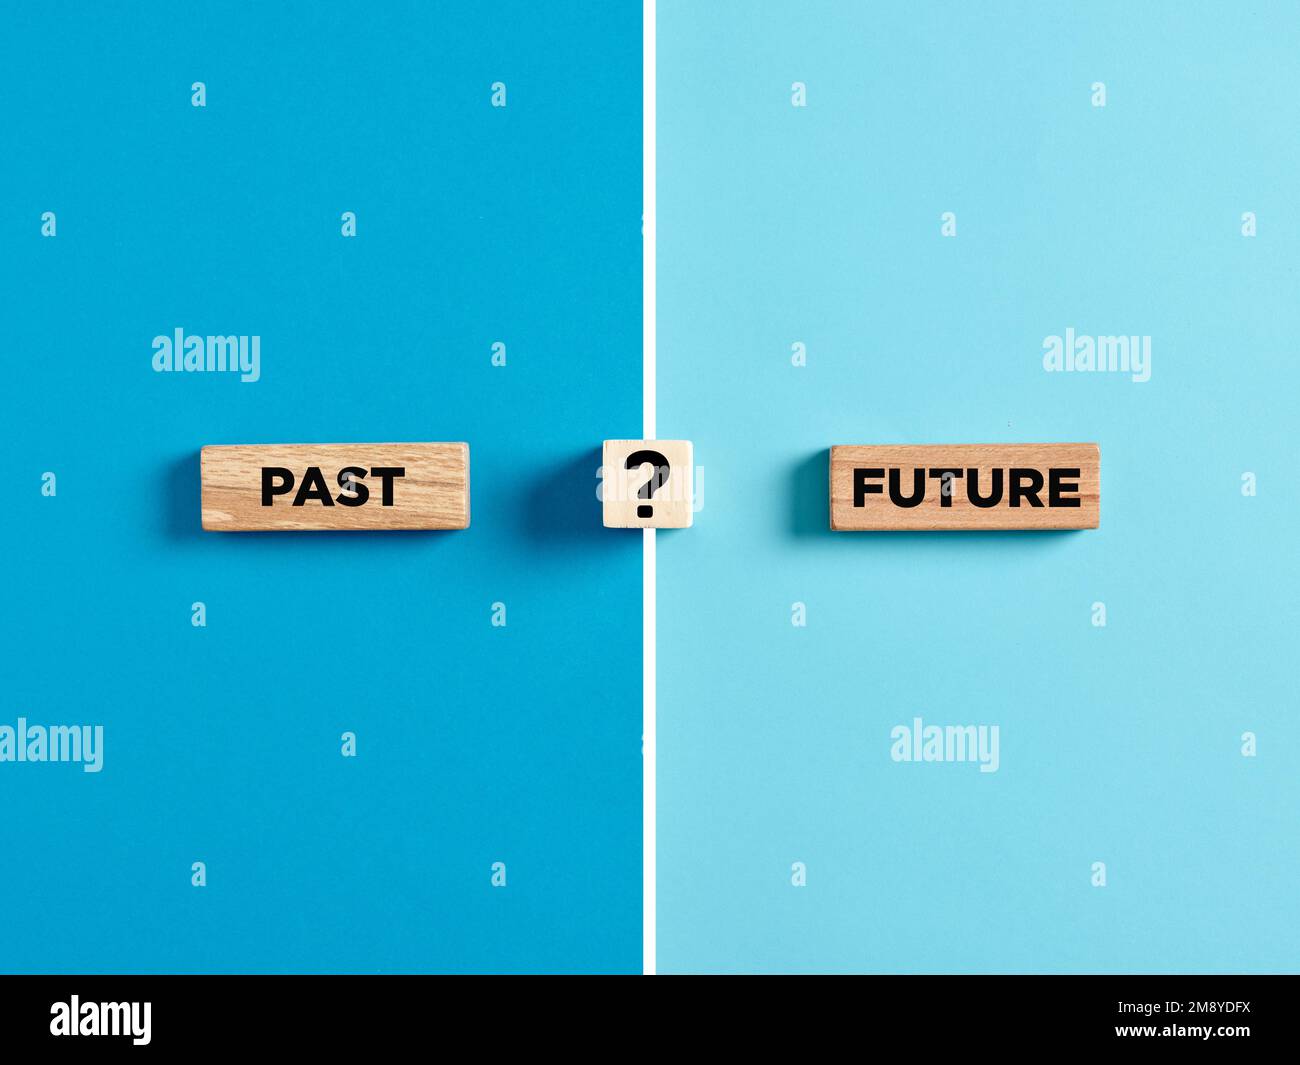 The words past and future on wooden blocks with question mark symbol. Dilemma or choice between the past and future concept. Stock Photo